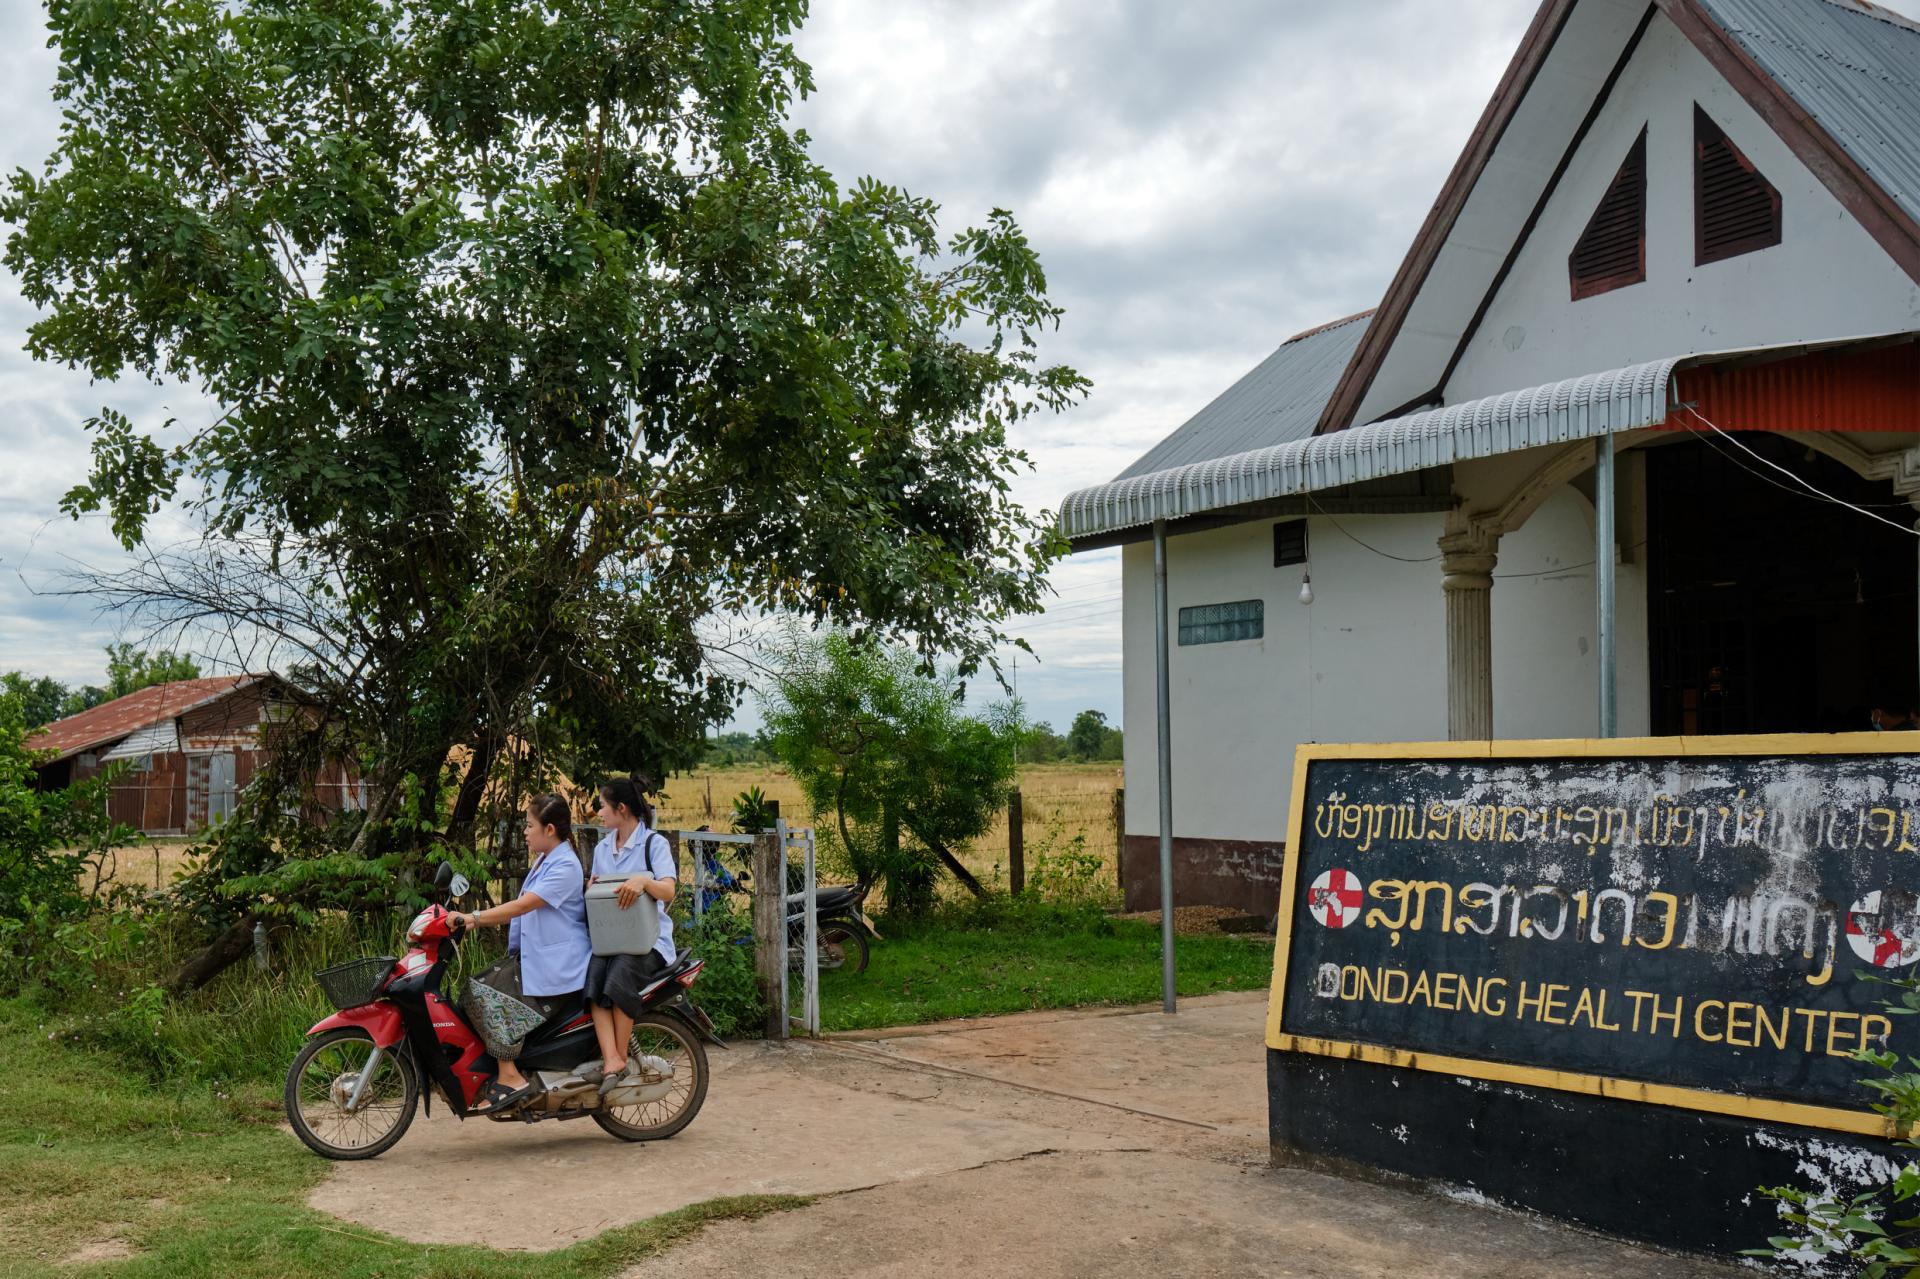 Nurses of Donedeng Health Center in Champasak Province conducting community outreach. Photo: BART VERWEIJ